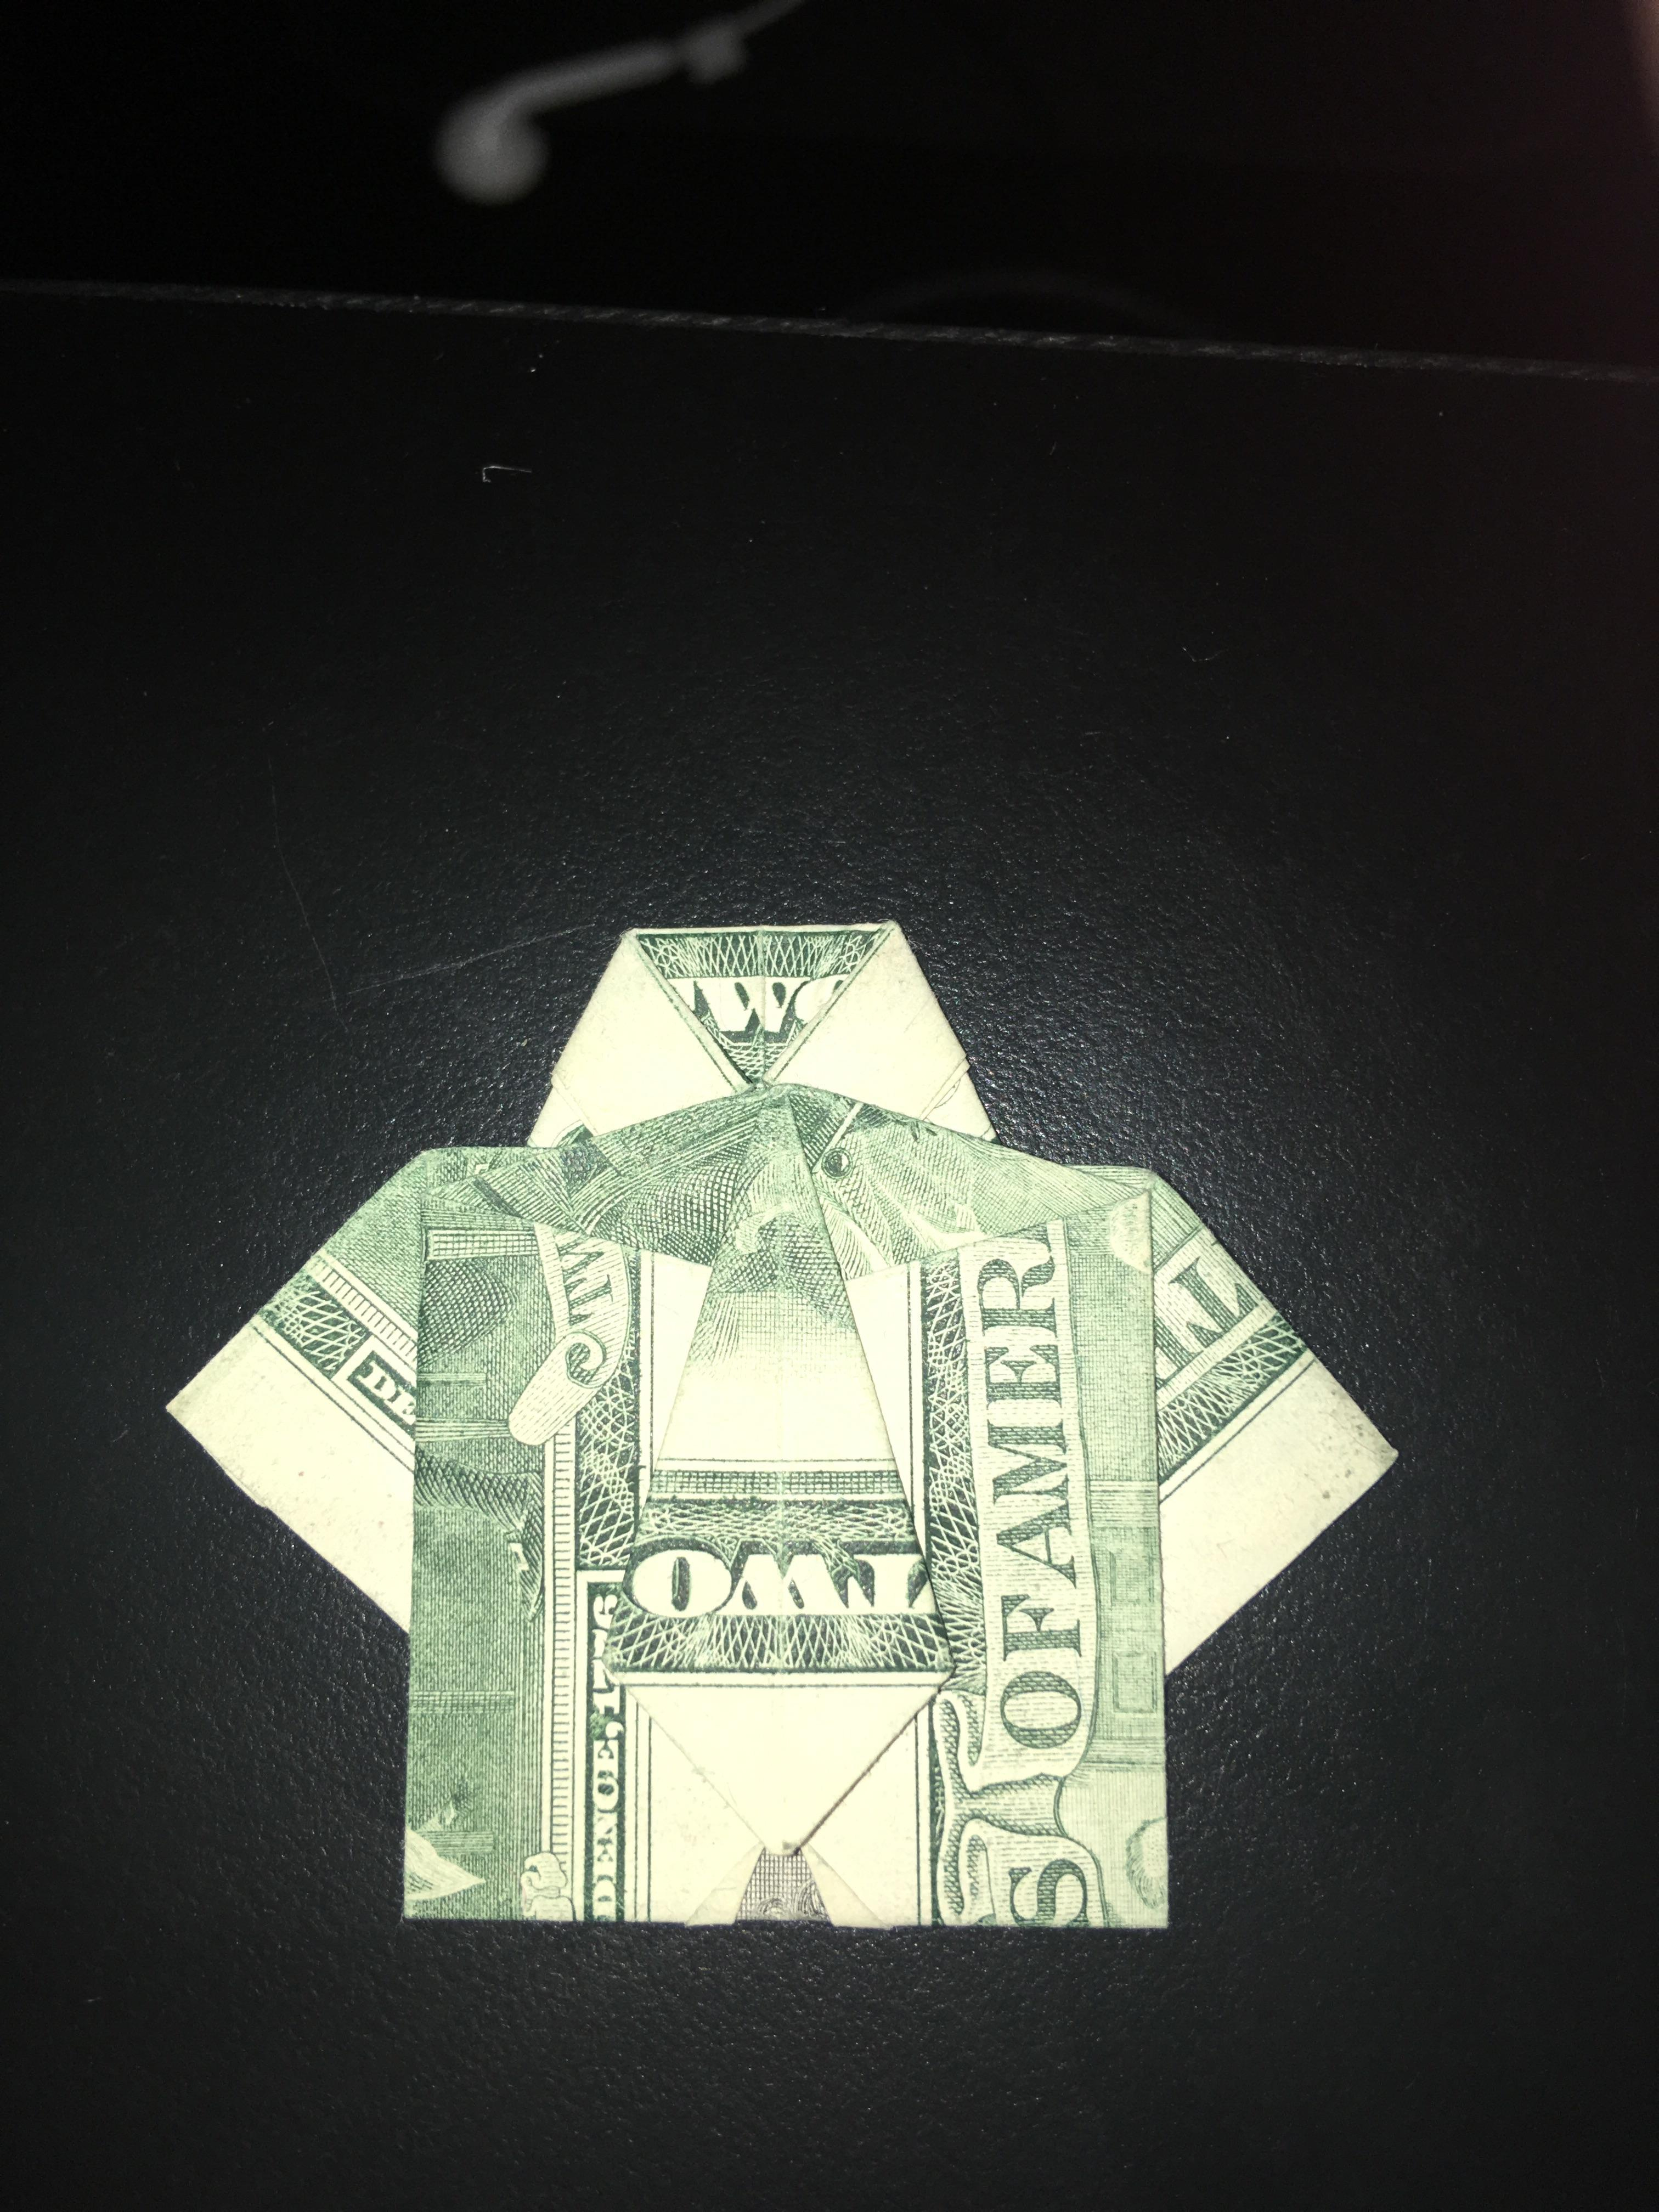 Origami T Shirt With Tie Fold Dollar Into Shirt And Tie Azrbaycan Dillr Universiteti